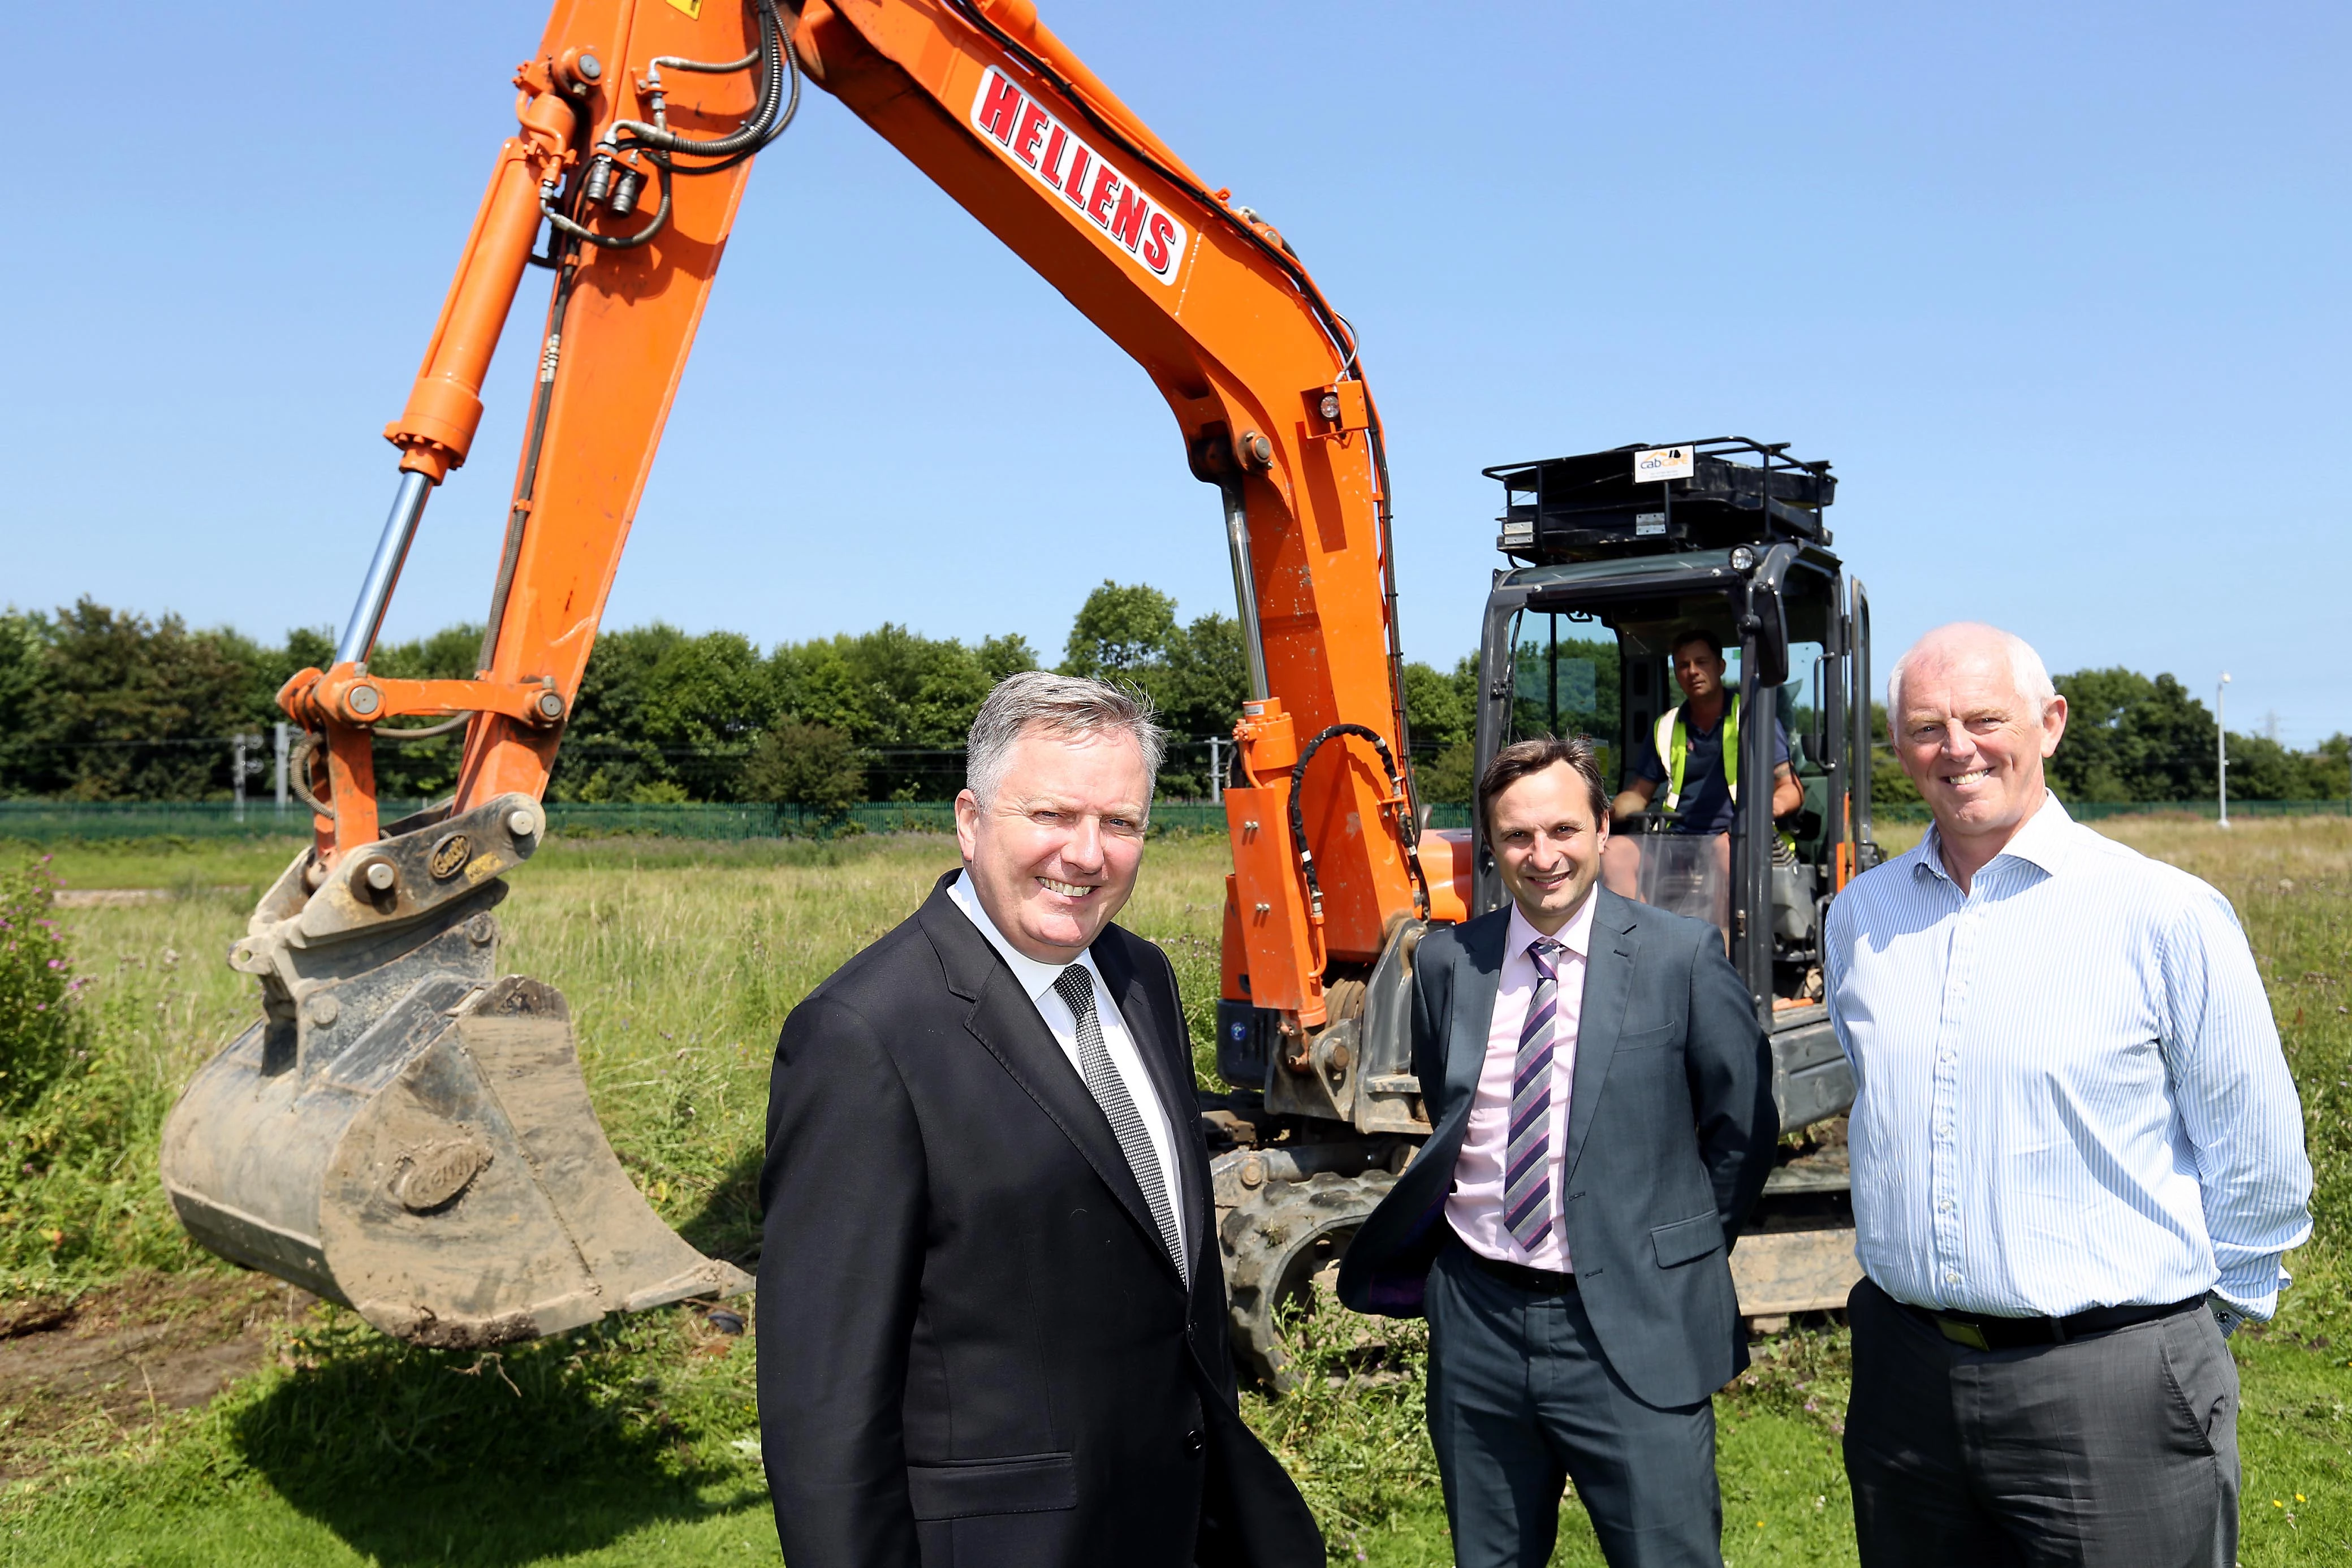 Councillor Iain Malcolm of South Tyneside Council, Gavin Cordwell-Smith of Hellens Group and David Land of the North East LEP pictured at Monkton Business Park.